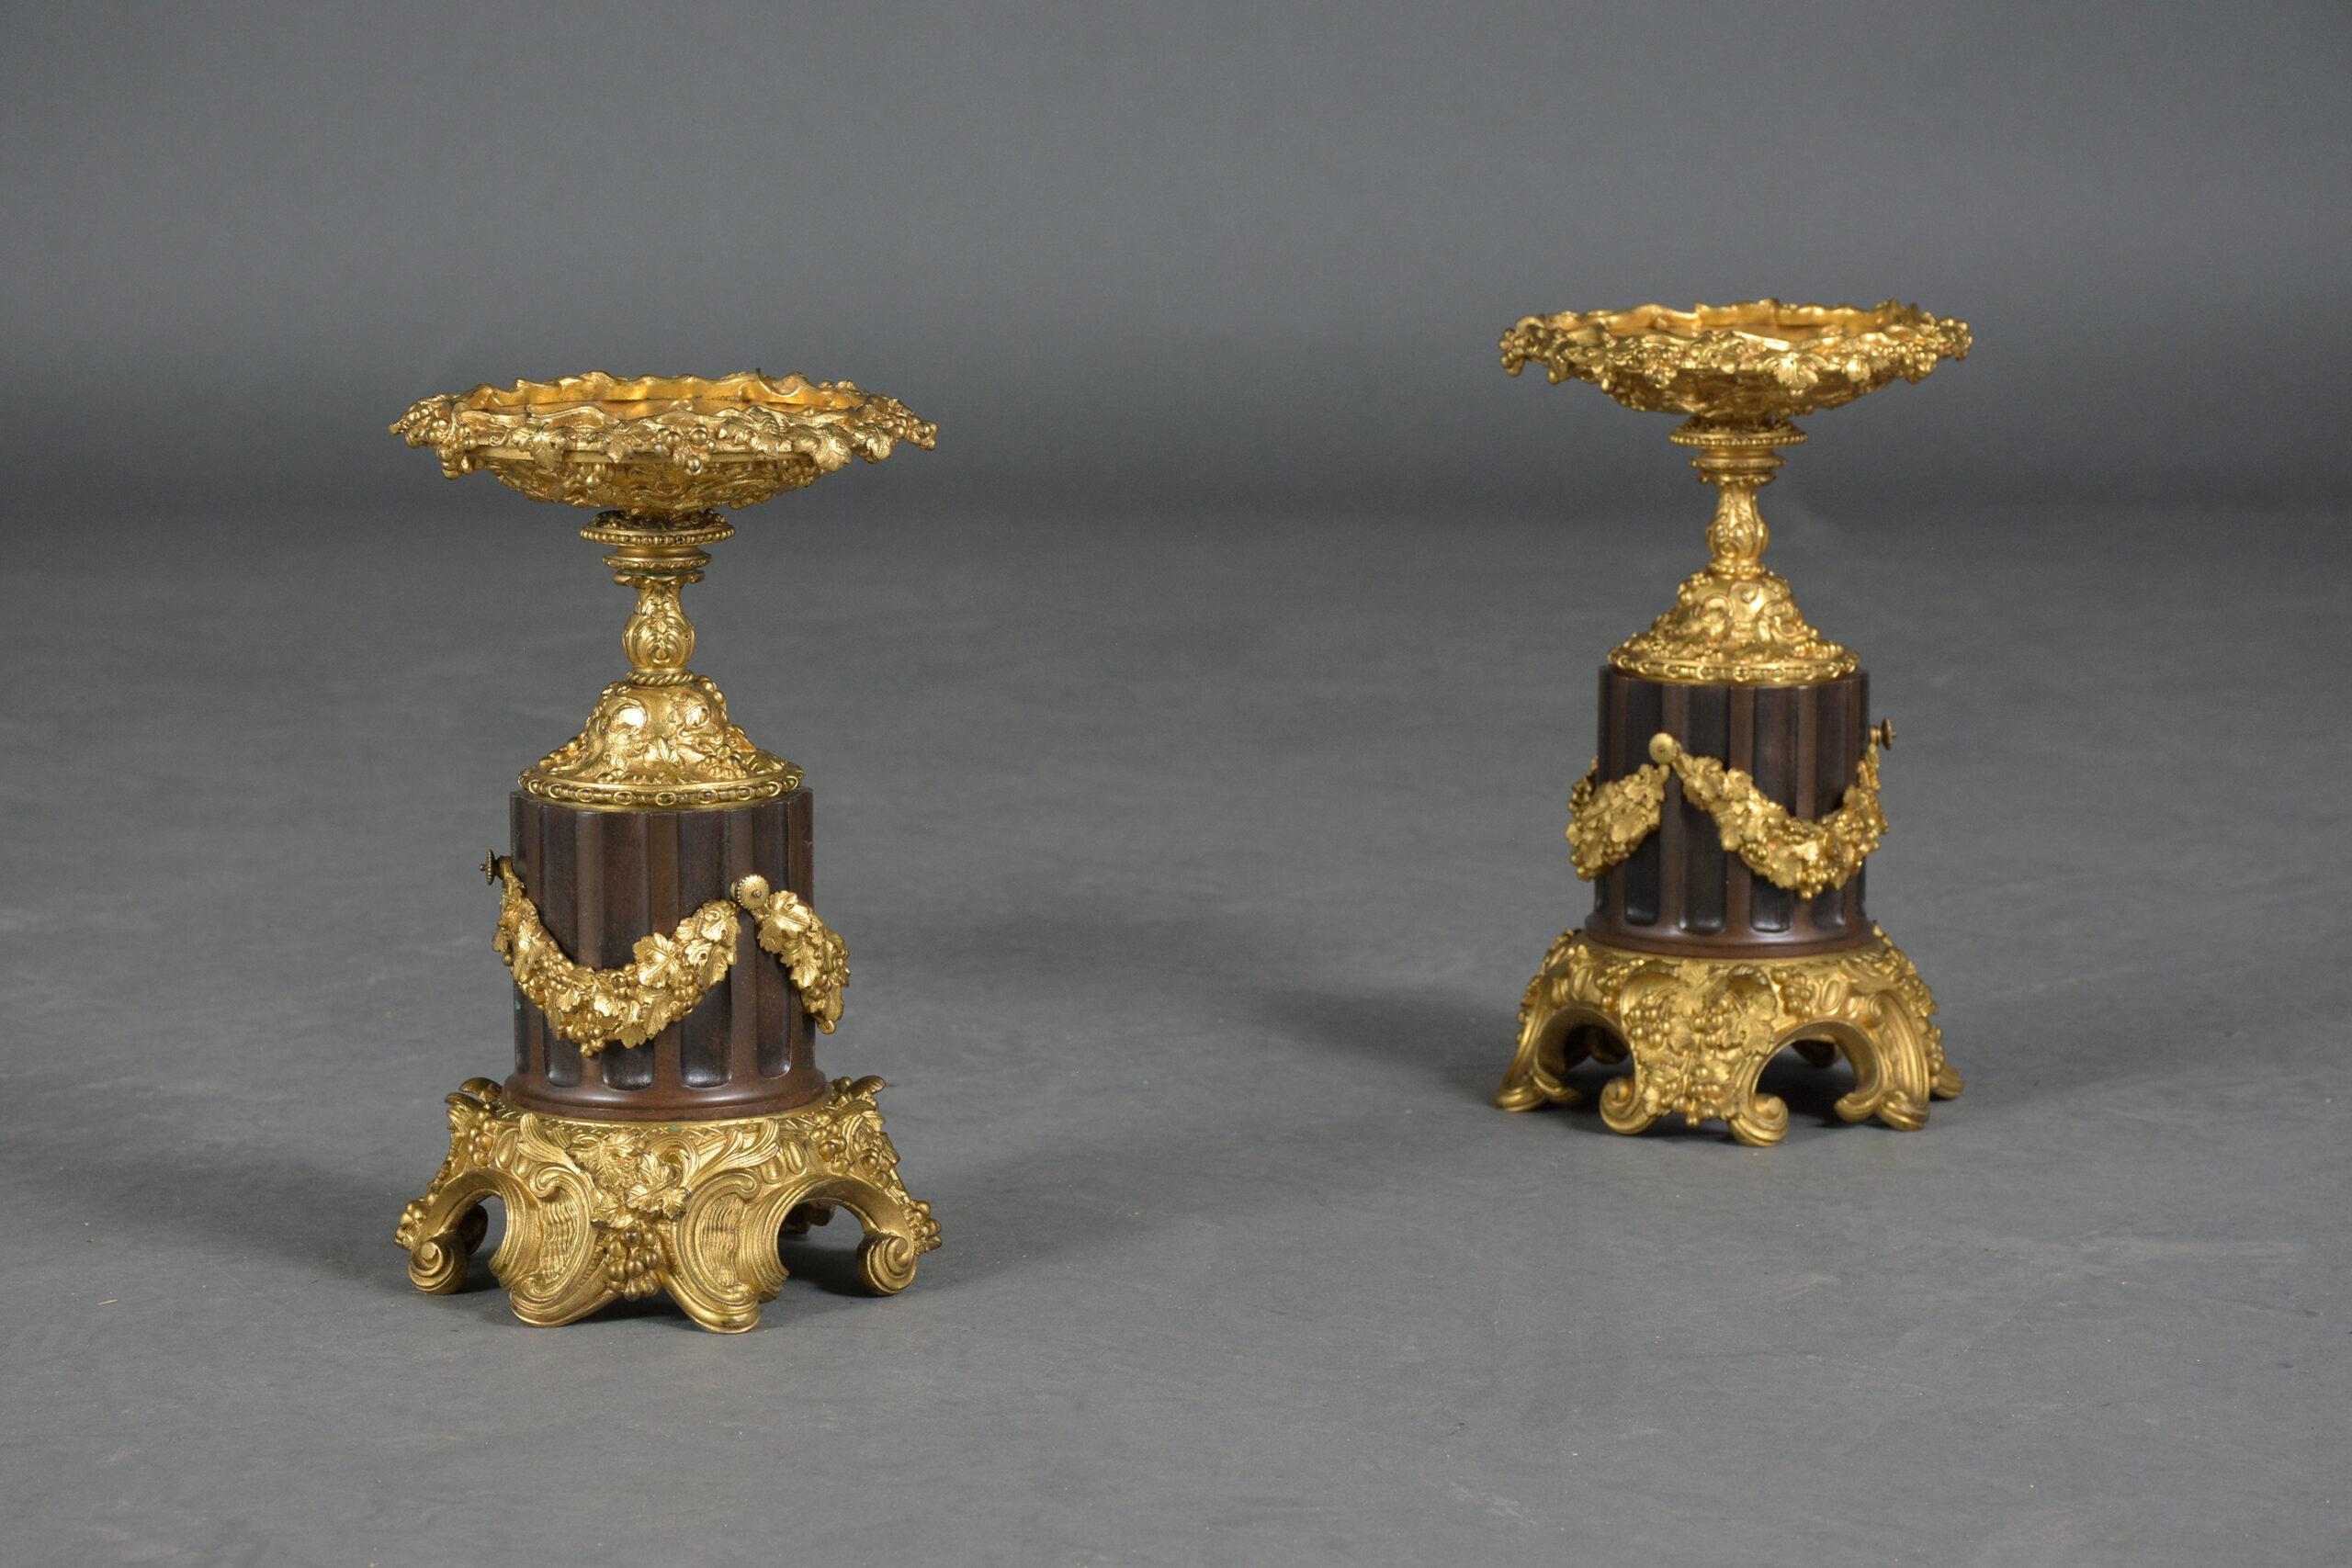 Step into the world of classical elegance with our exquisite pair of early 19th-century French urns, true masterpieces of craftsmanship and historical beauty. These antique cassolettes, crafted from bronzed material, have undergone professional